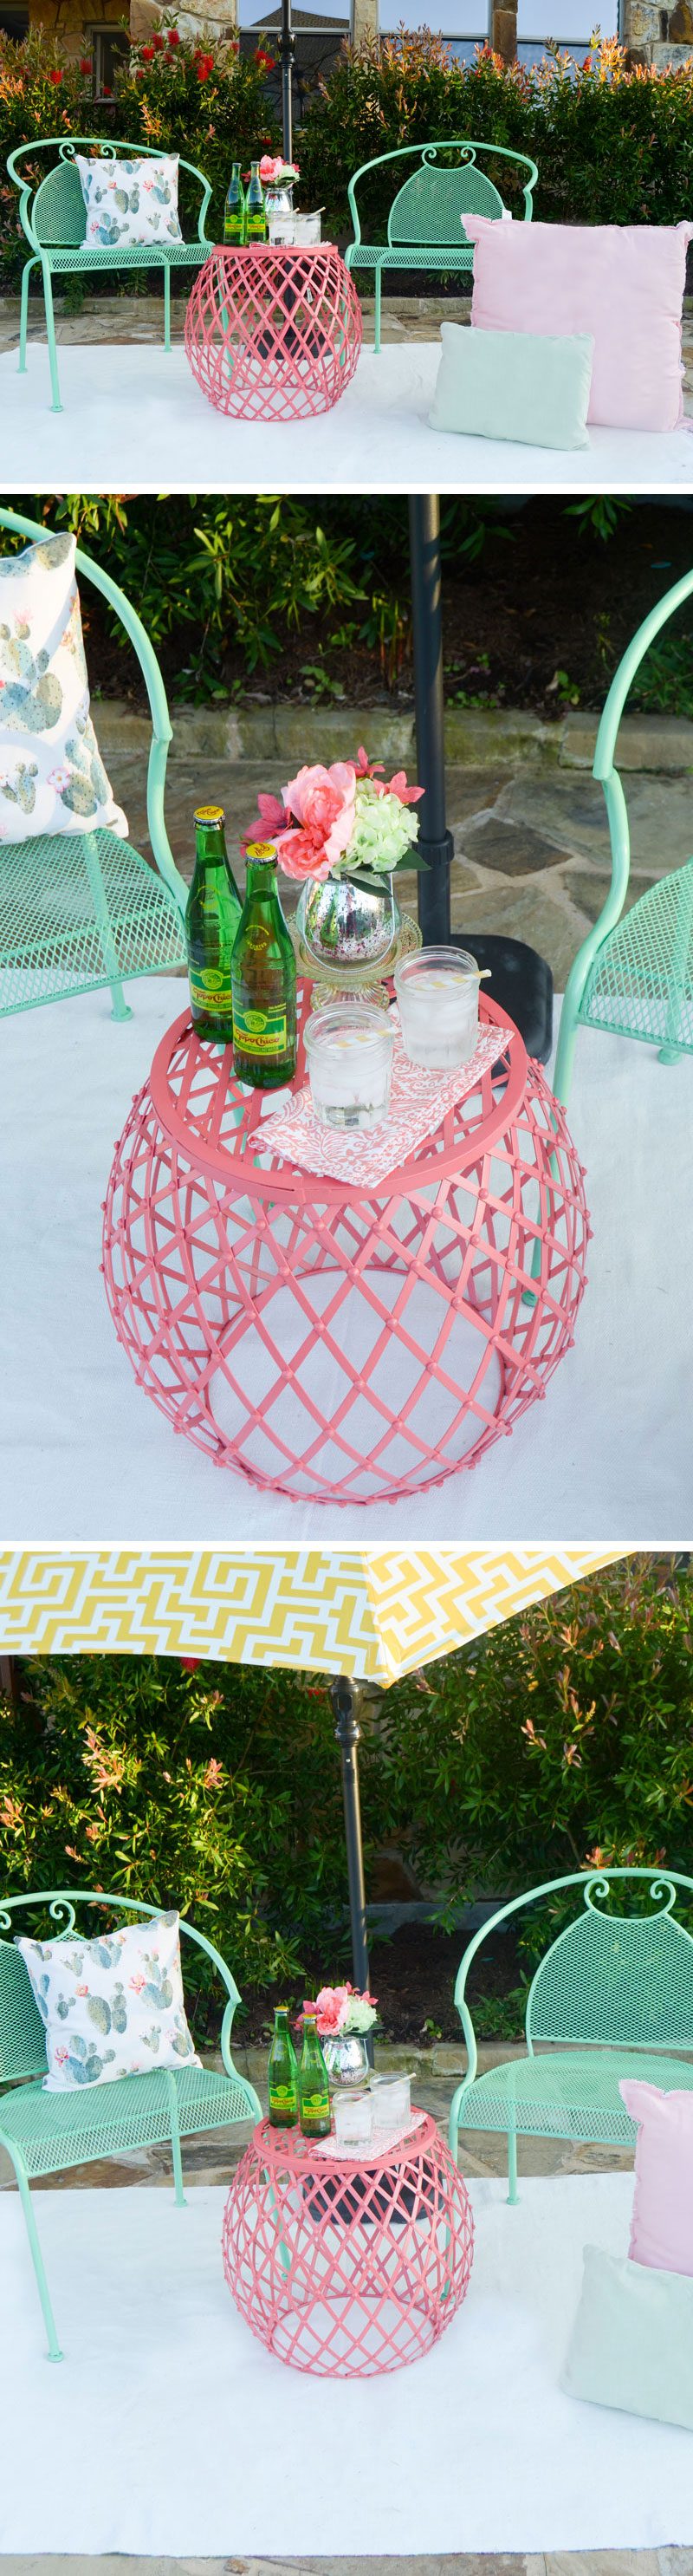 Outdoor Entertaining Ideas by Lindi Haws of Love The Day